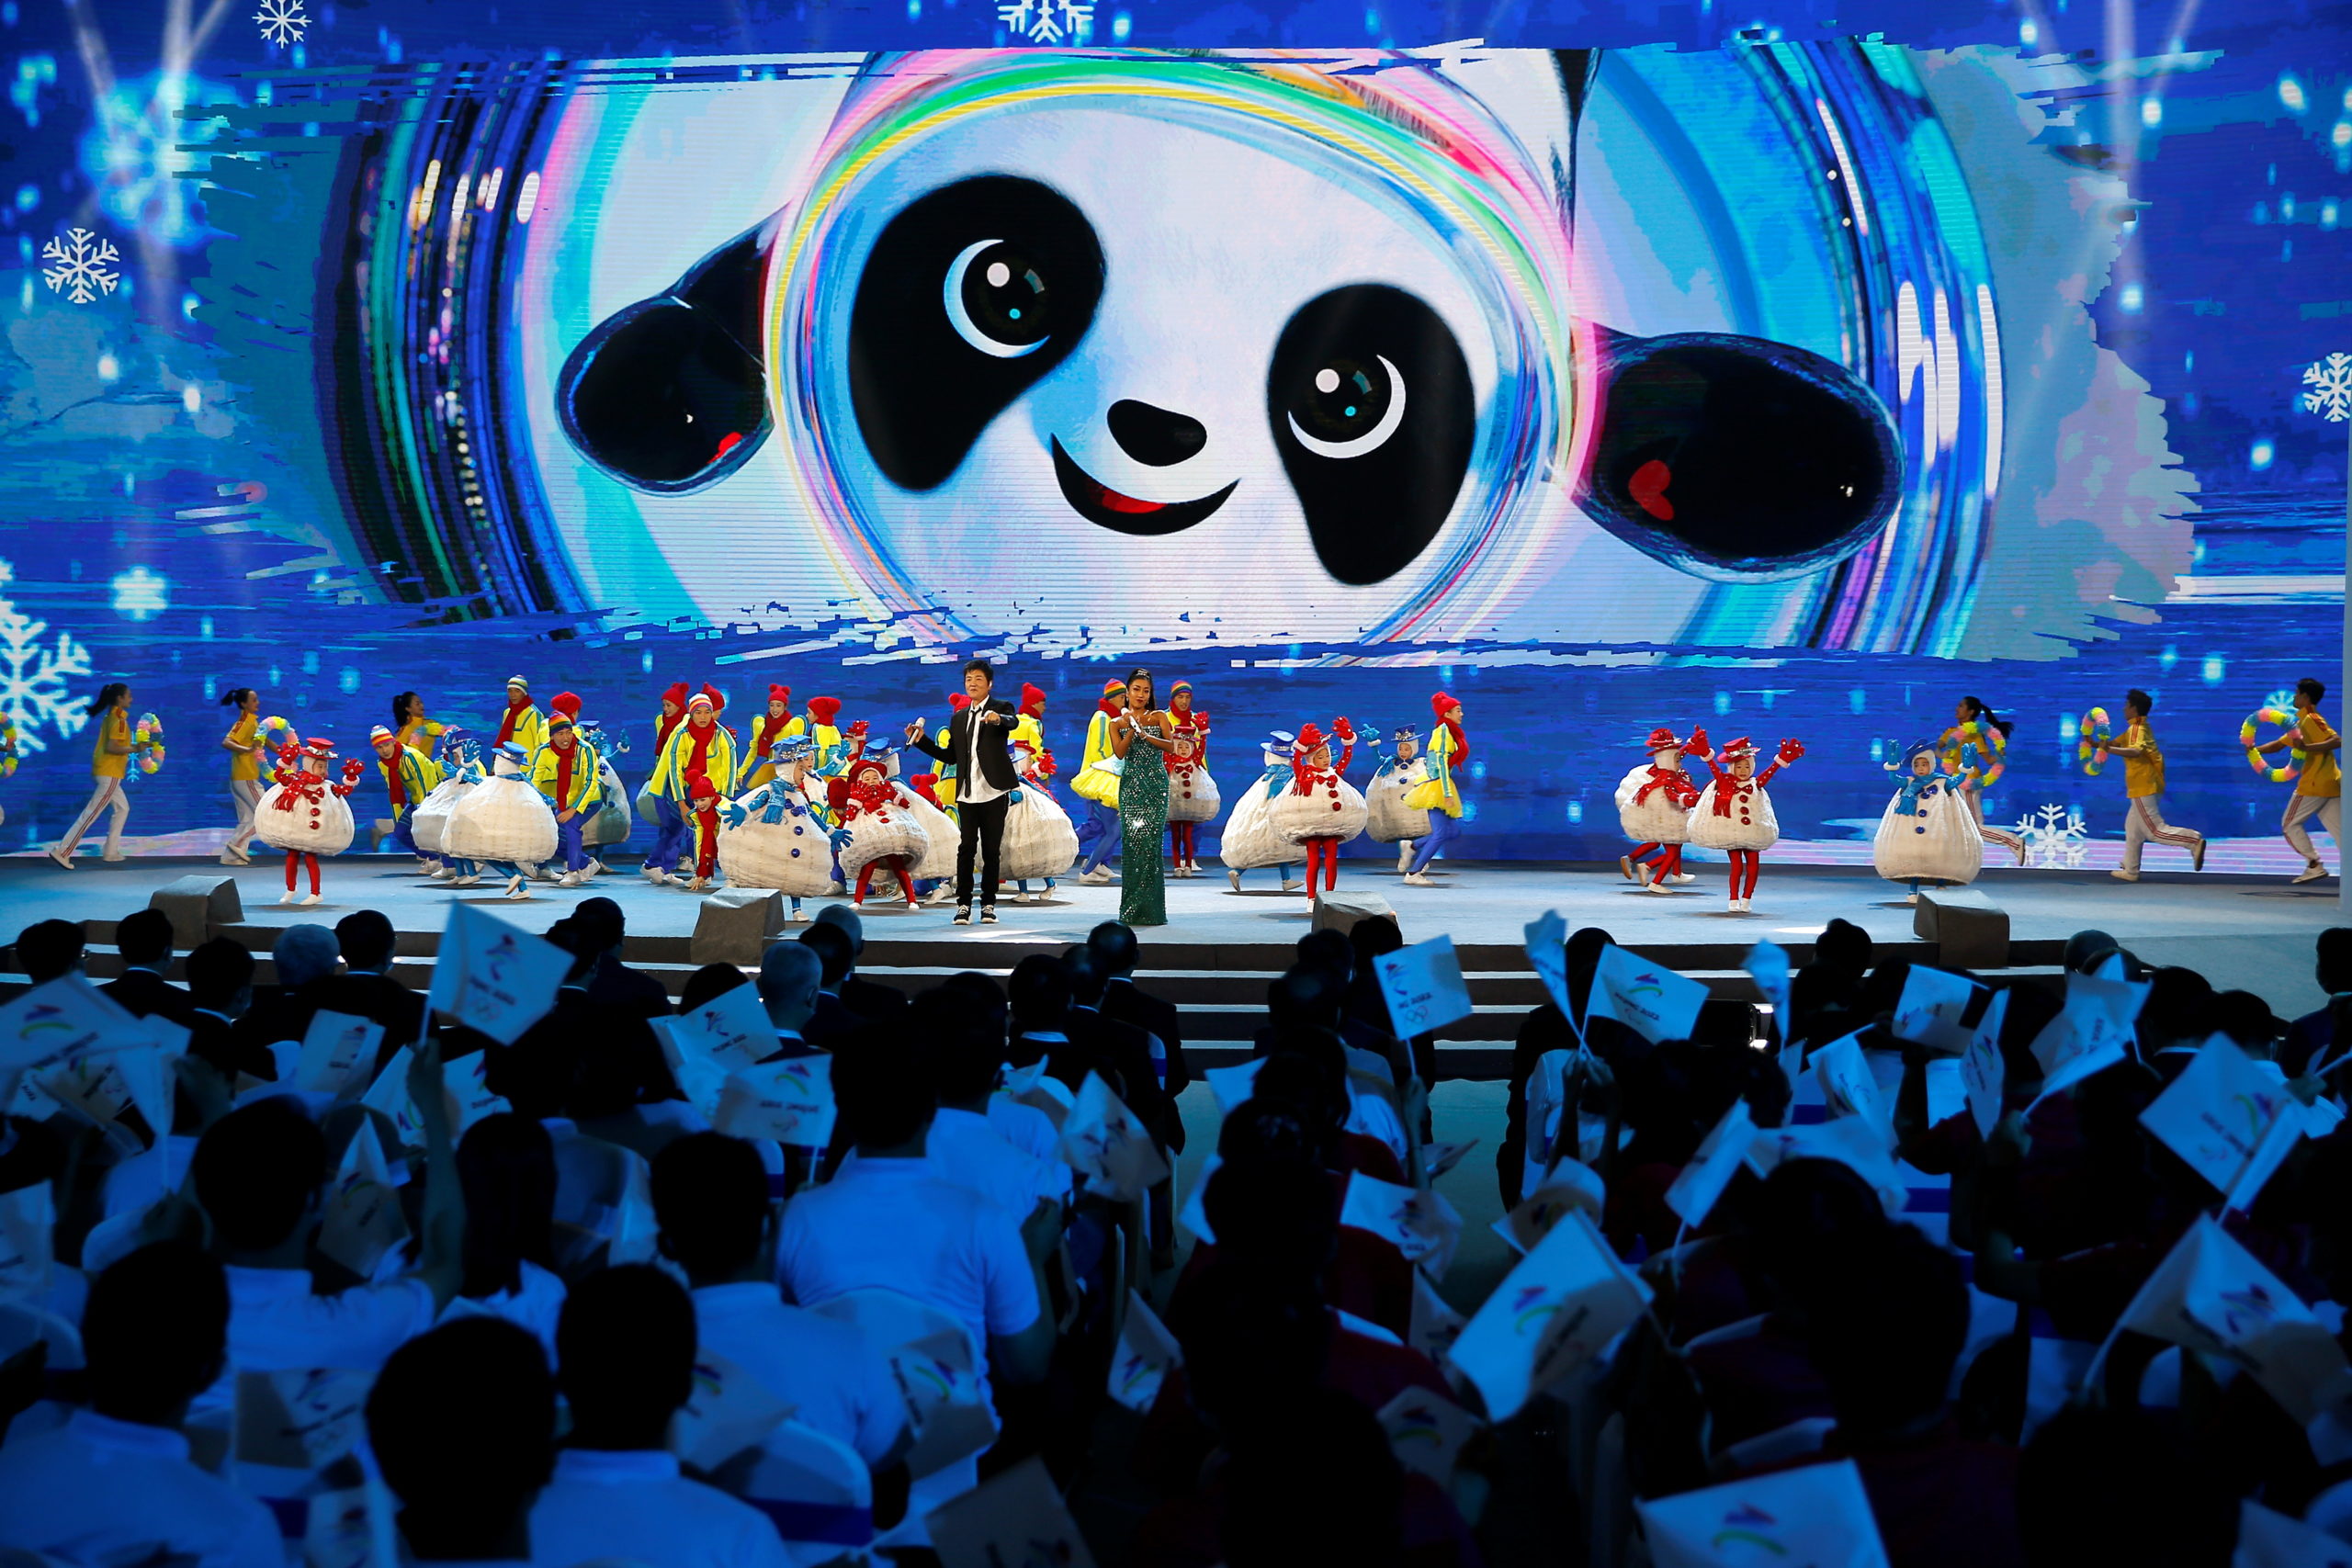 Singers perform on stage at a ceremony unveiling the slogan for Beijing 2022 Winter Olympics, in Beijing, China 